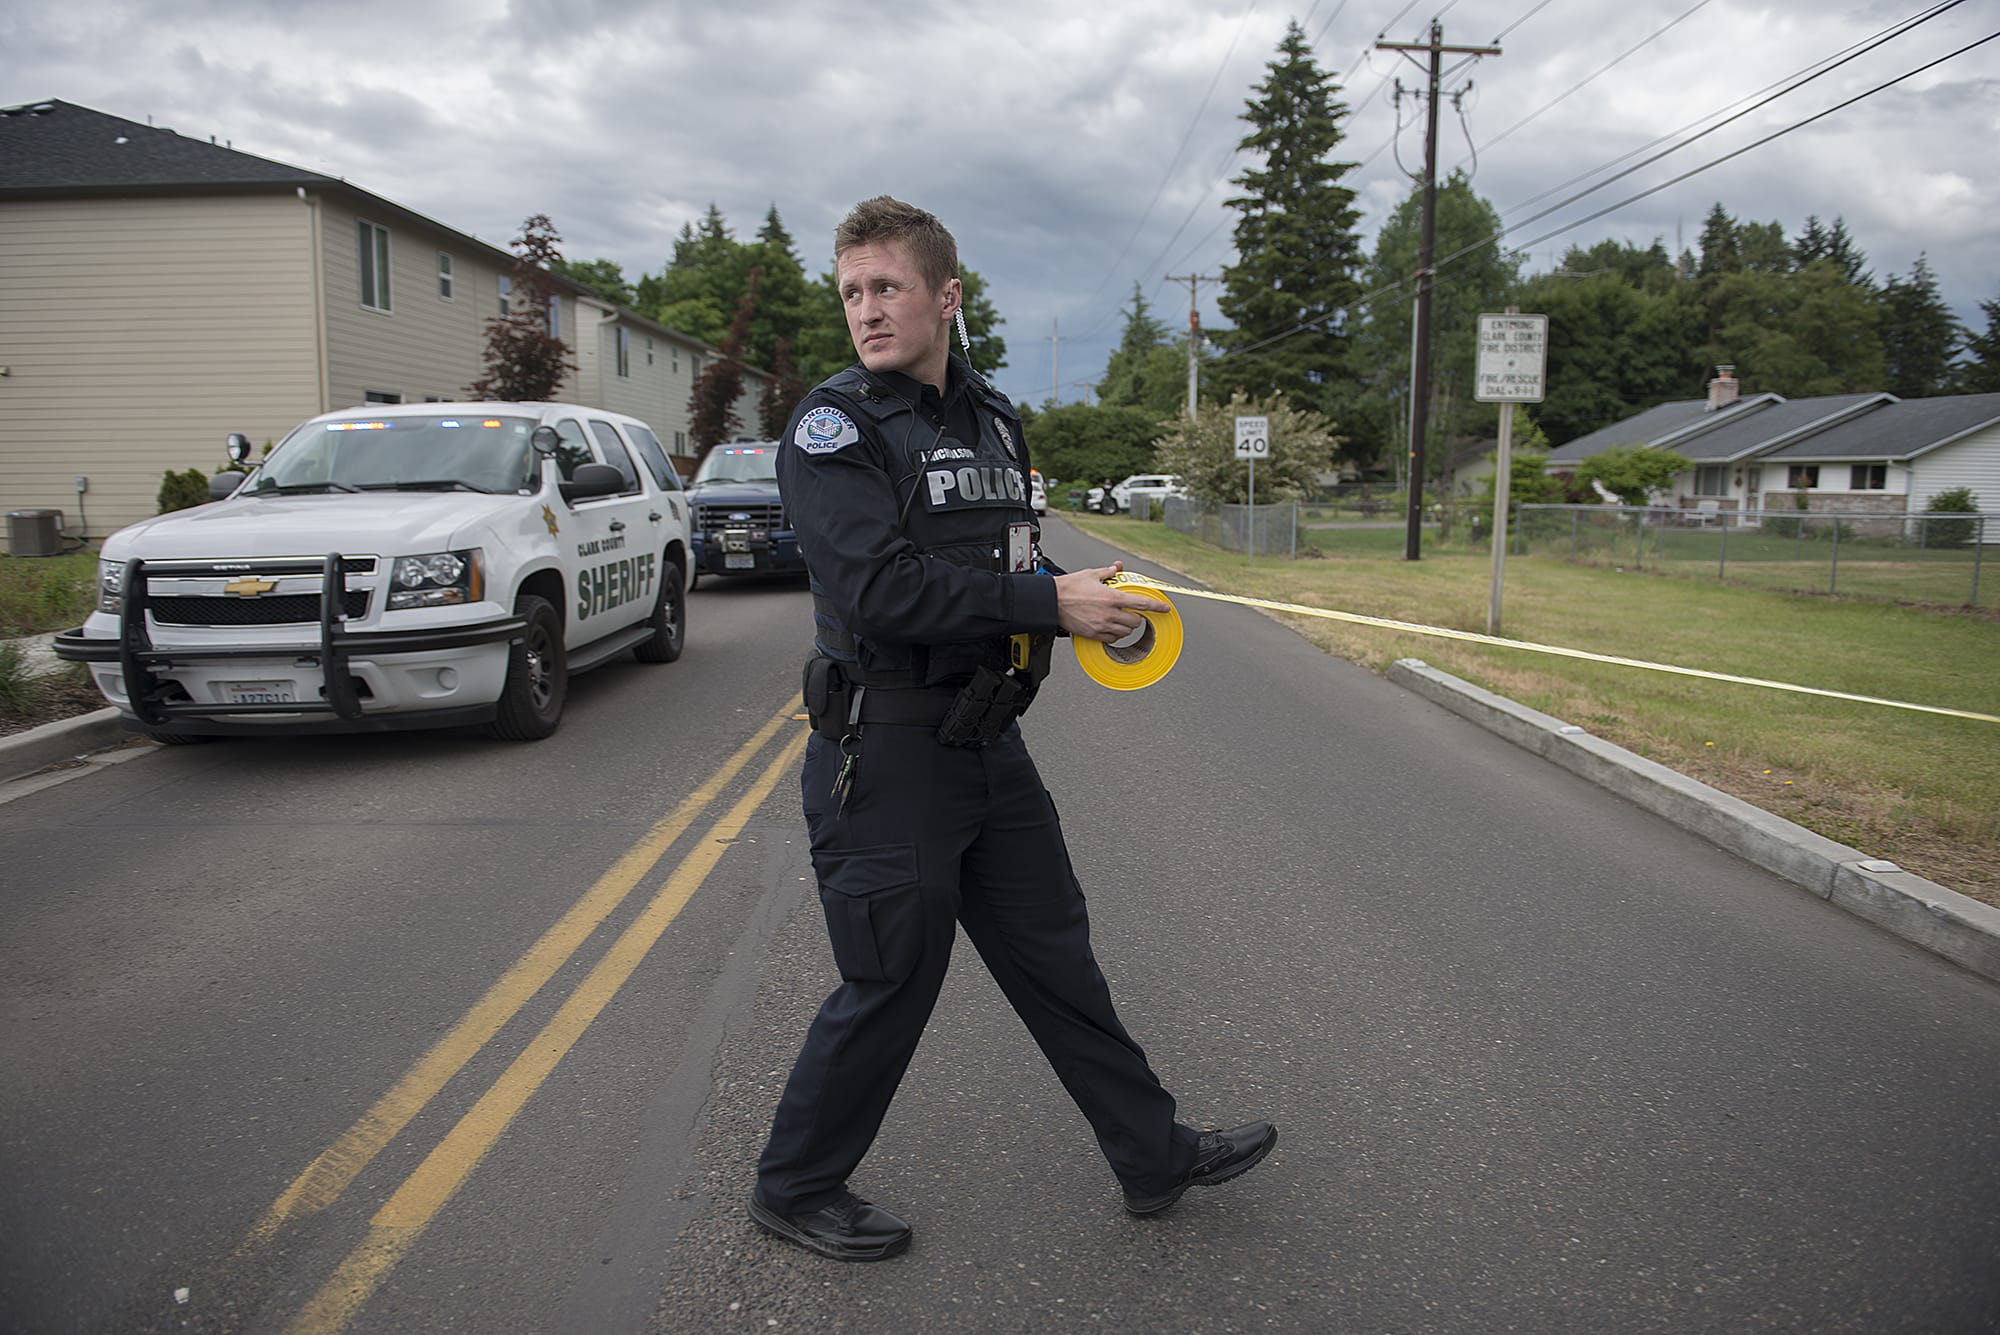 Officer Jason Nicholson puts up crime scene tape at the intersection of Northeast 114th Street and Northeast 124th Avenue after an officer-involved shooting in Brush Prairie on Wednesday afternoon, June 13, 2018. The tape was removed soon after and the intersection was opened.